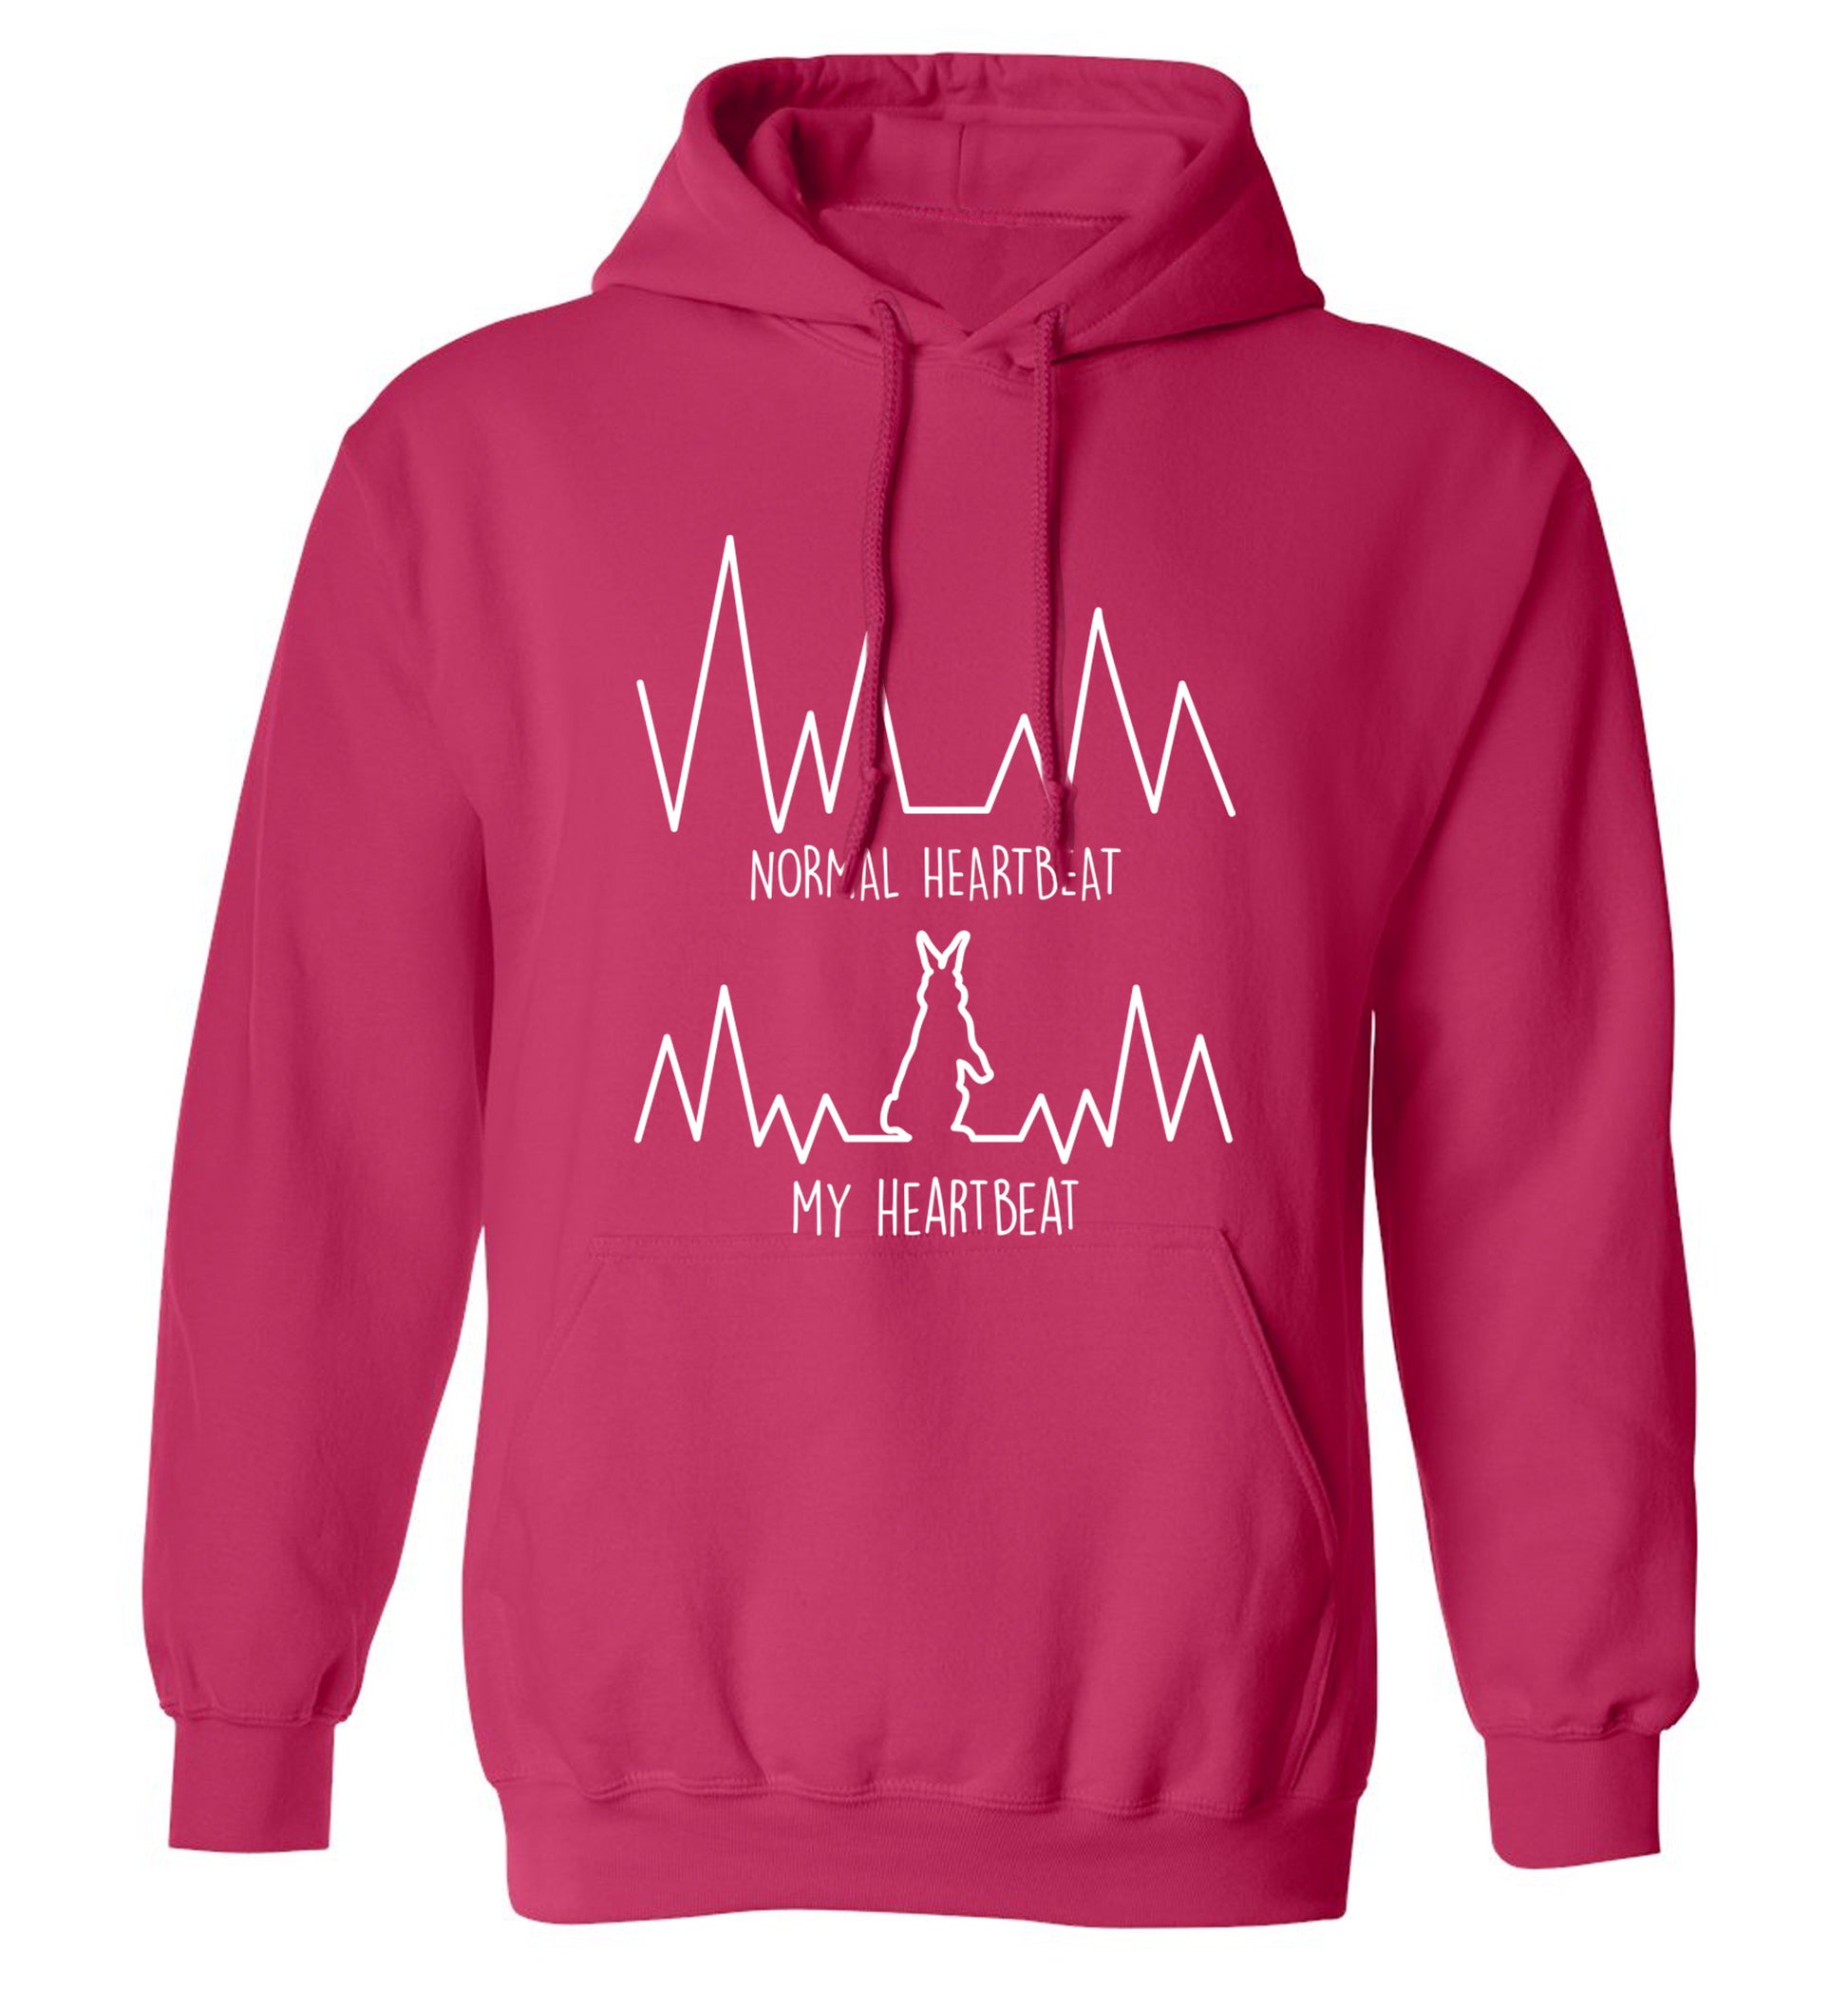 Normal heartbeat, my heartbeat rabbit lover adults unisex pink hoodie 2XL